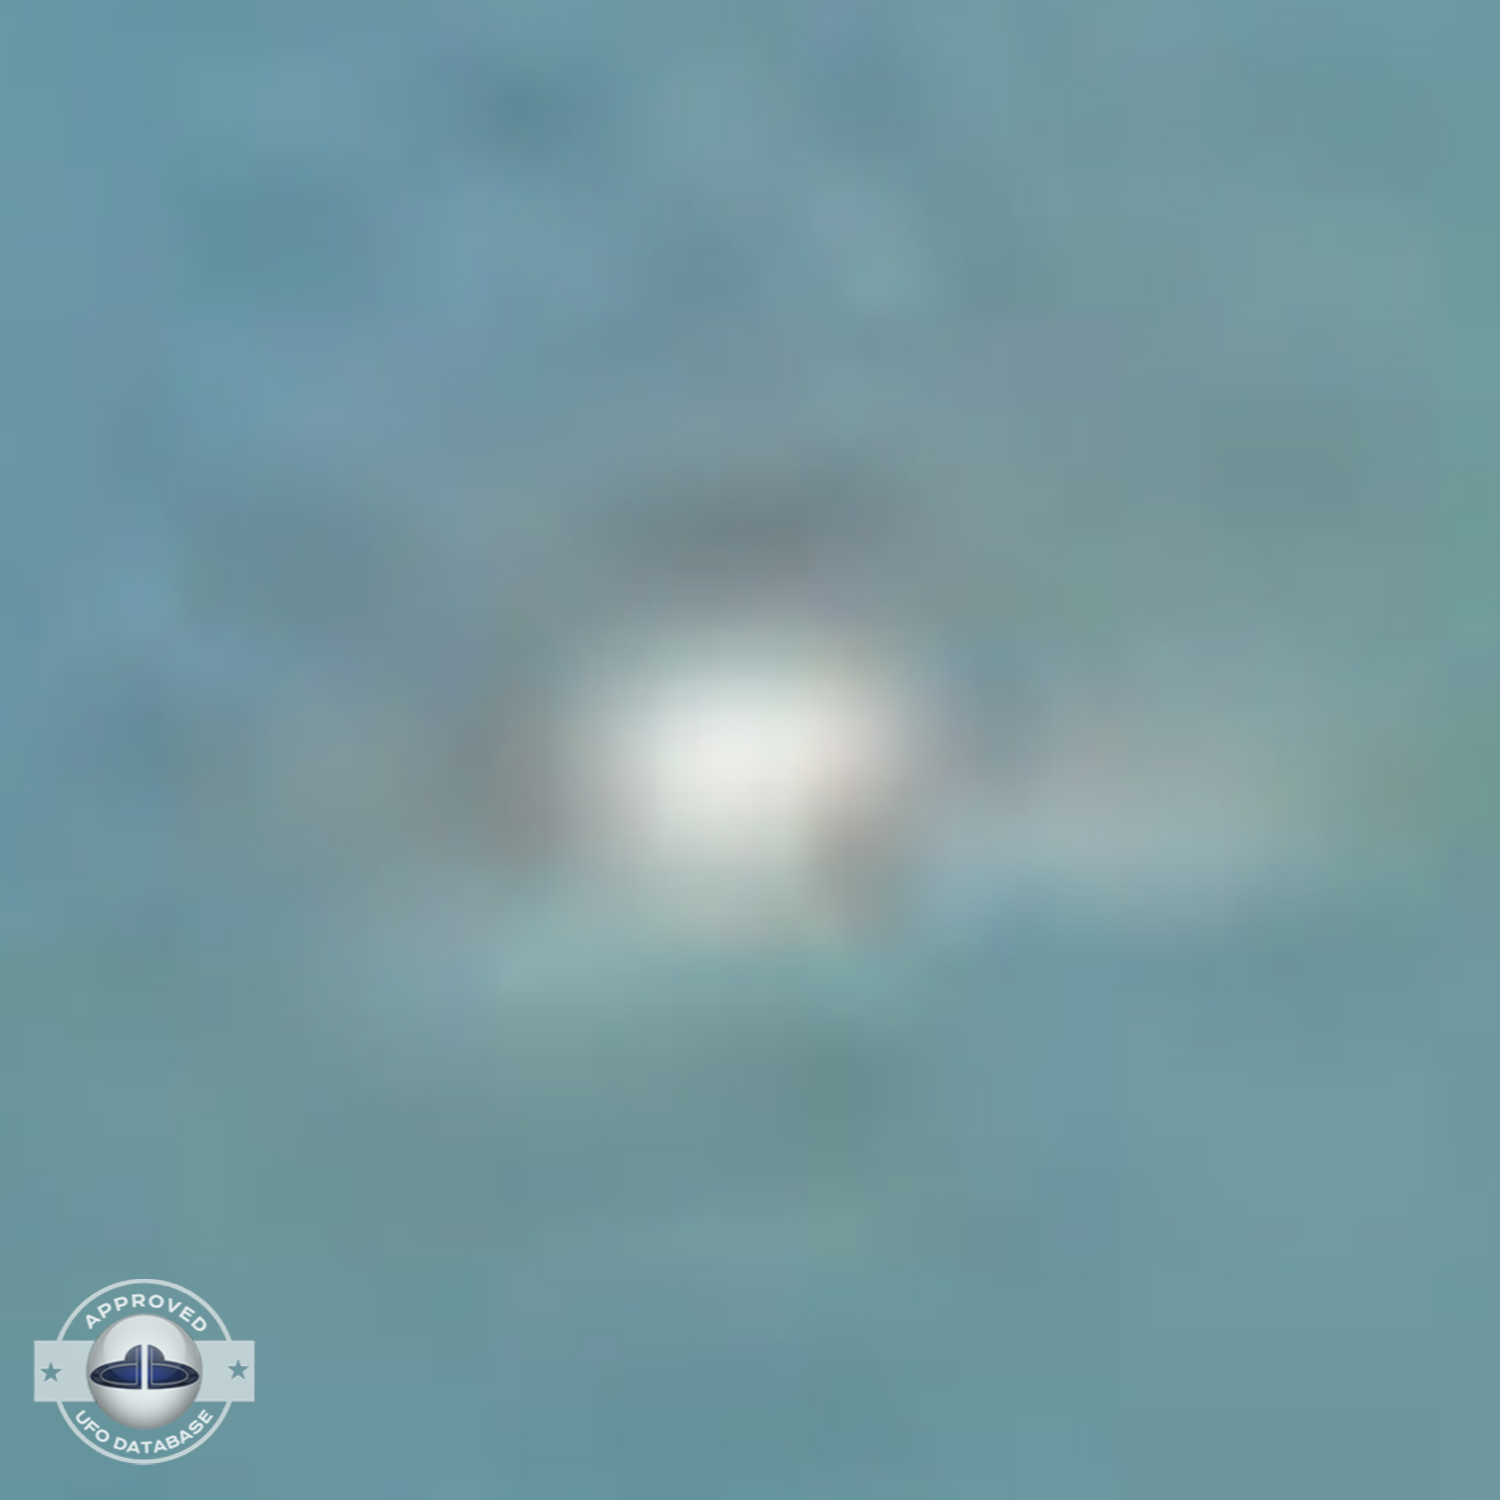 UFO Picture shot on boat on a Princess Cruise to Alaska - June 2006 UFO Picture #95-6